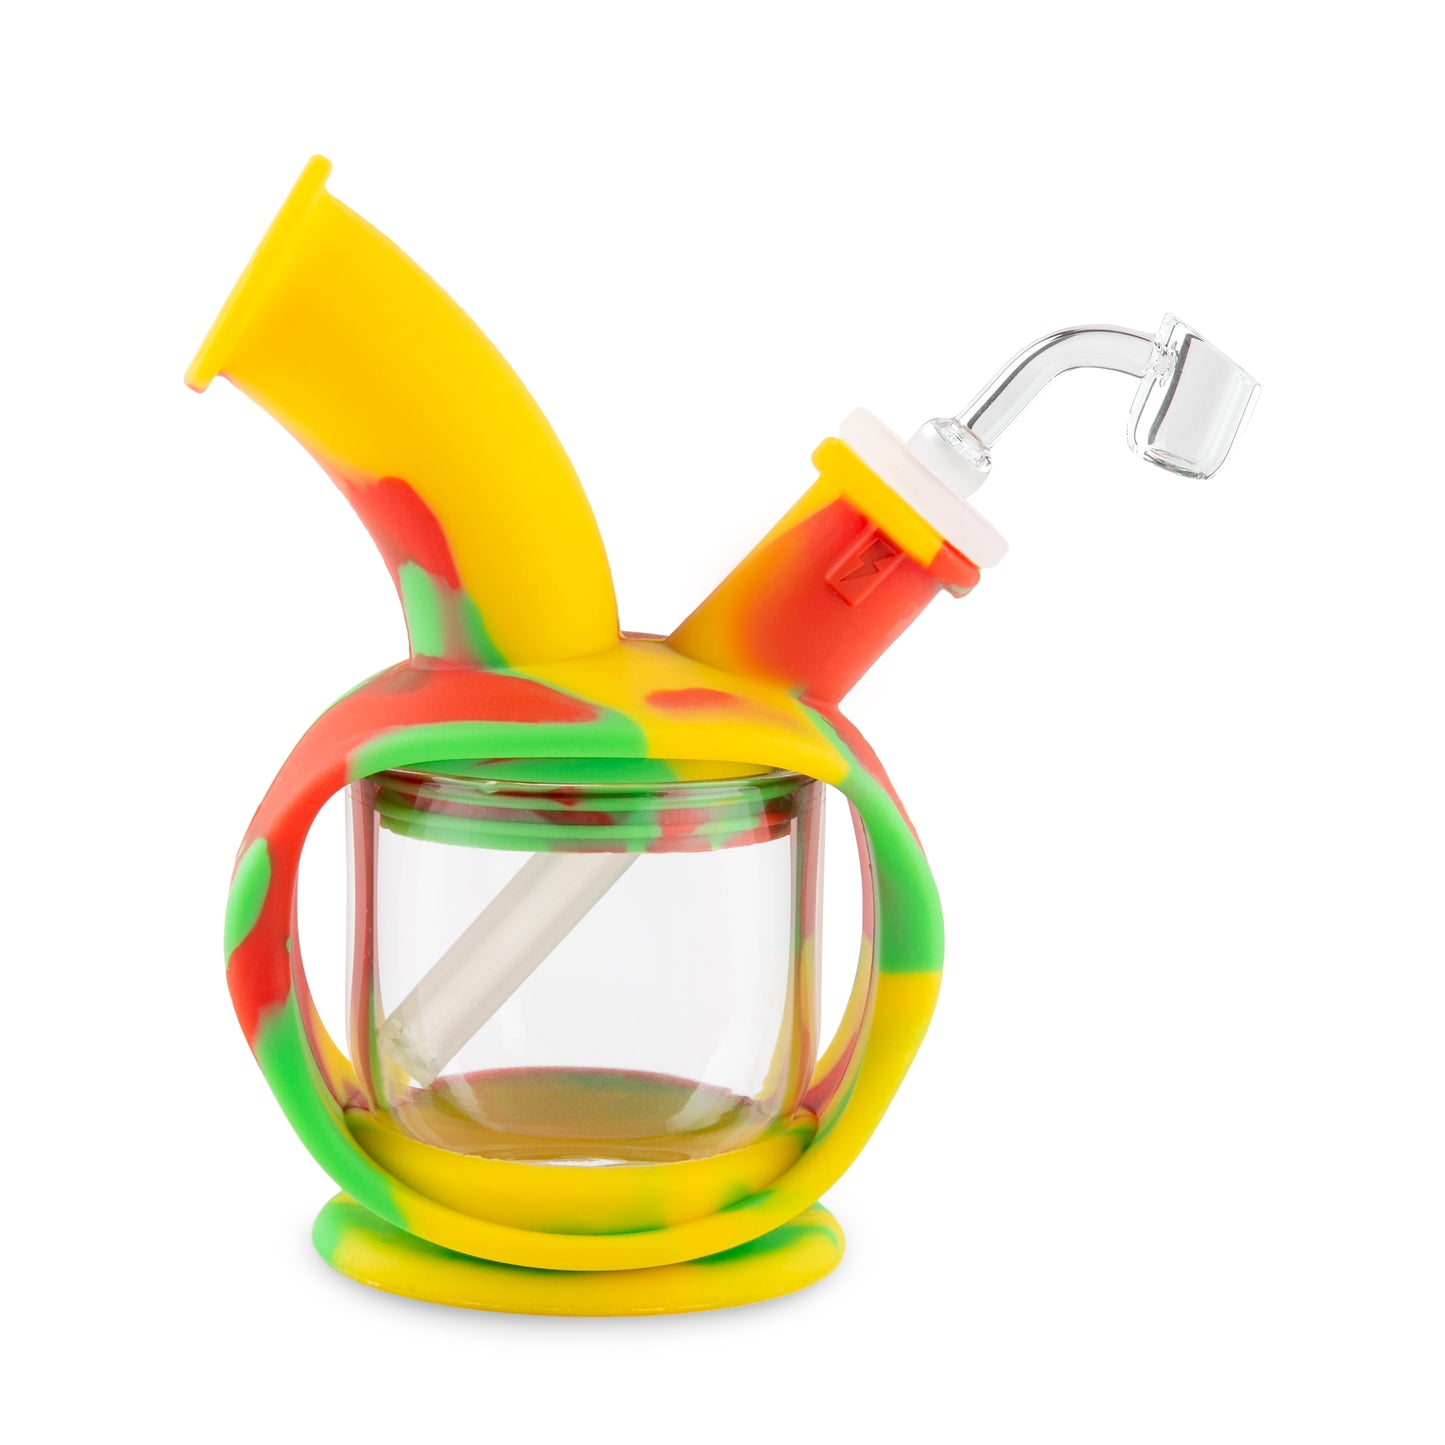 Ooze Kettle Silicone Water Bubbler & Dab Rig - Rasta